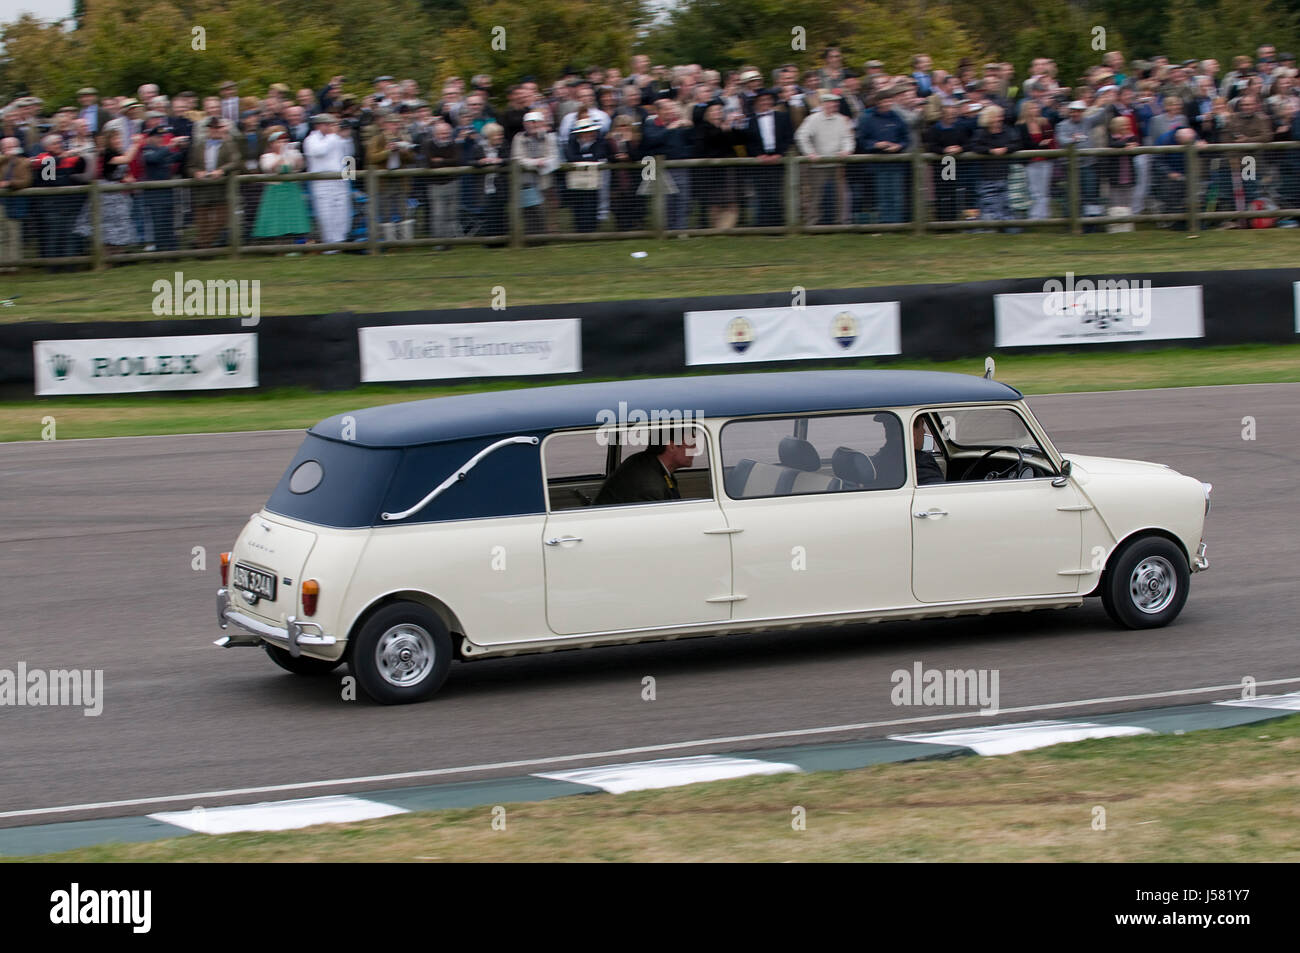 Mini stretch limousine at 2009 Goodwood Revival meeting Stock Photo